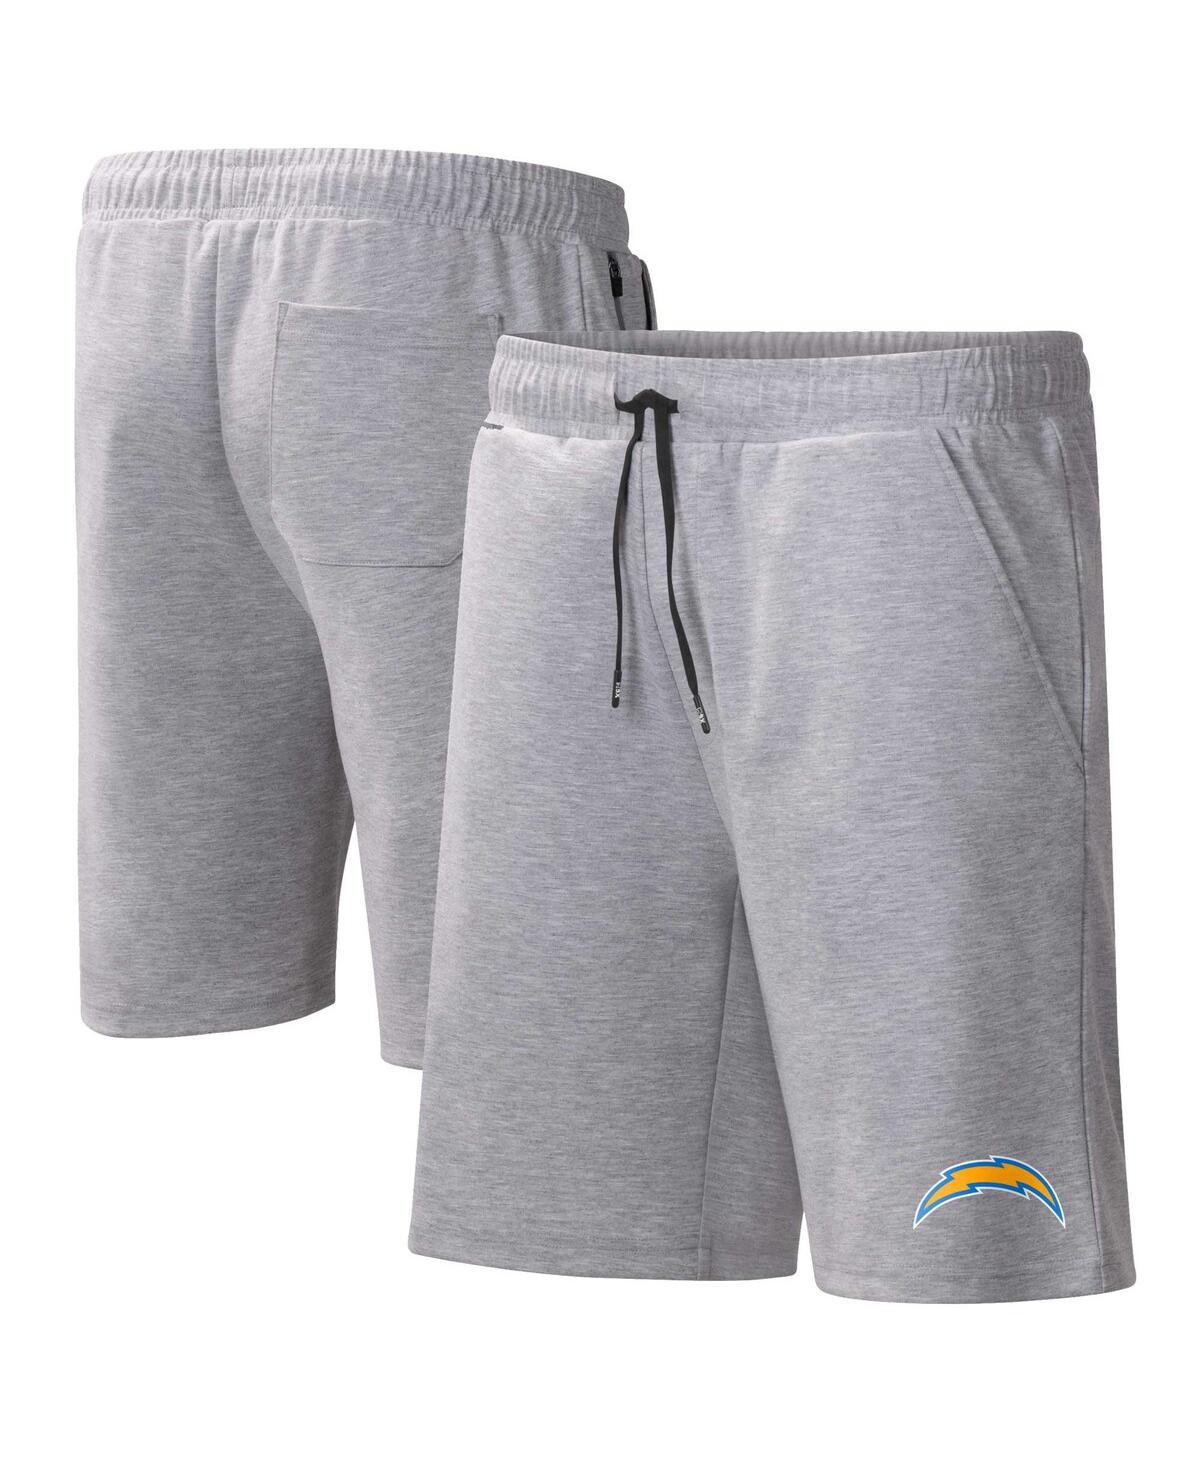 Men's Msx by Michael Strahan Heather Gray Los Angeles Chargers Trainer Shorts - Heather Gray